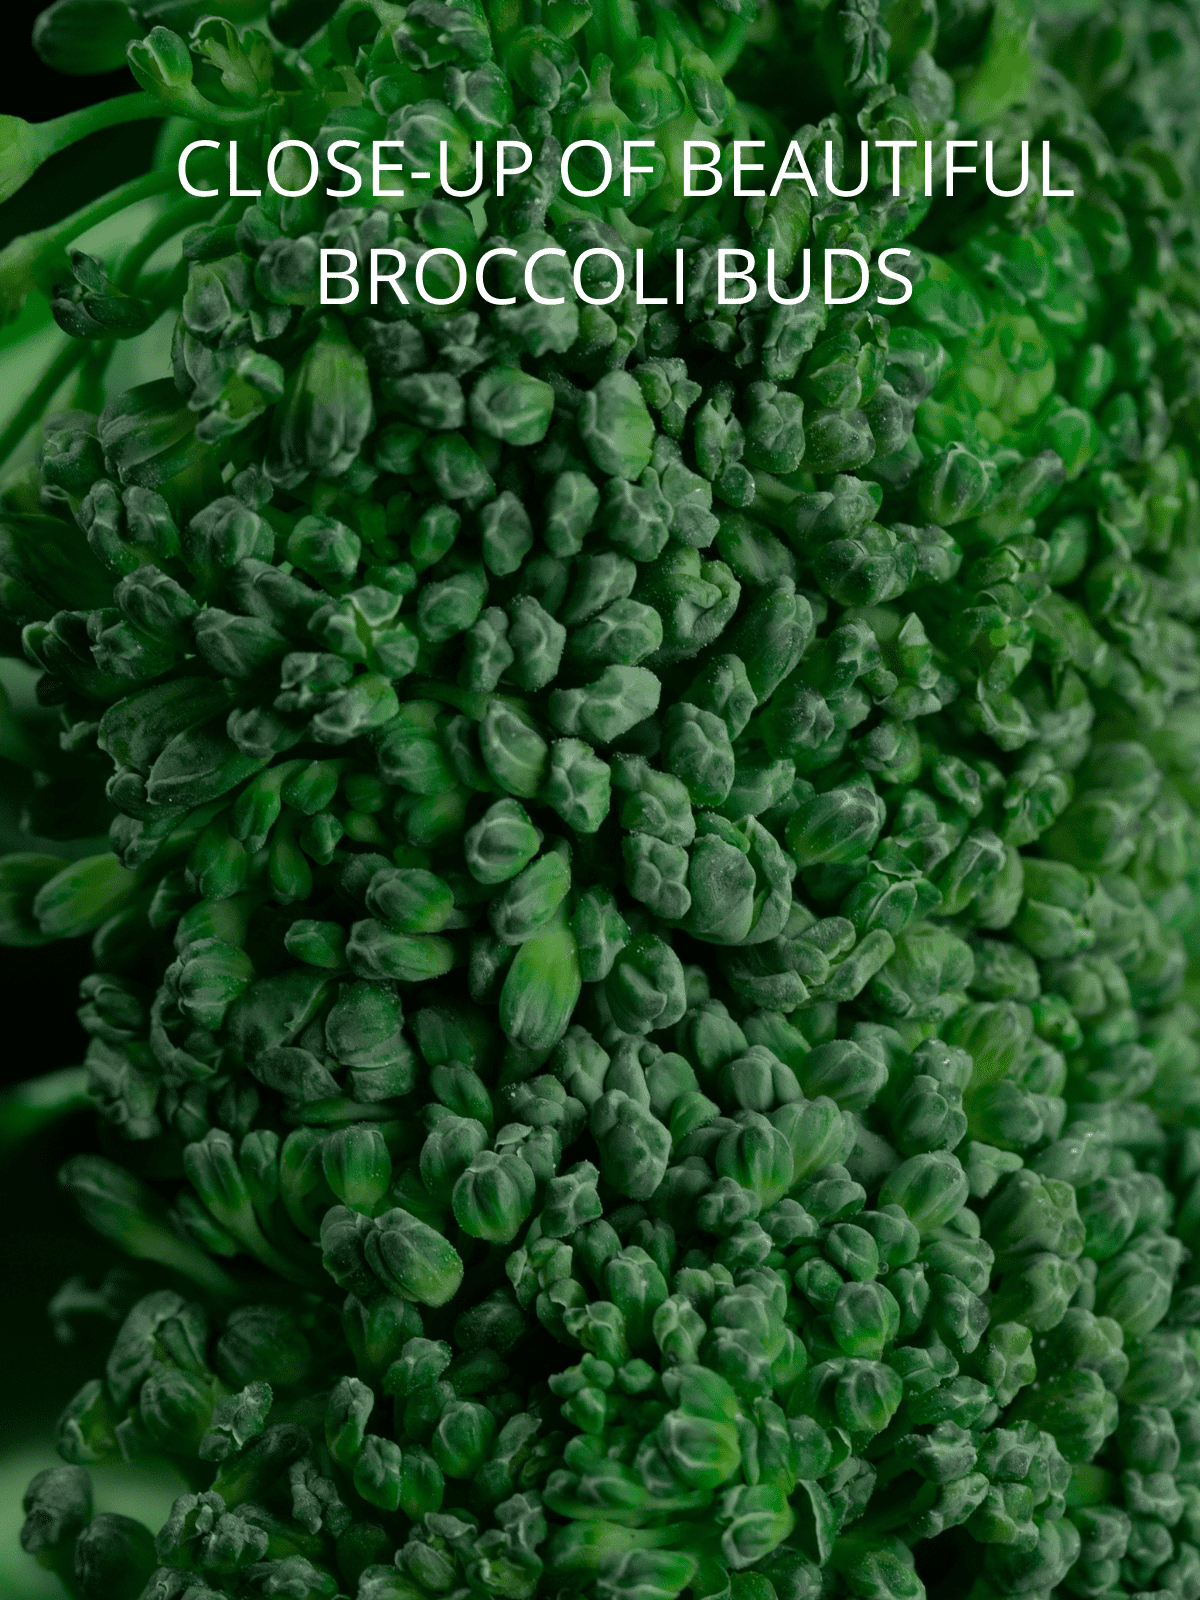 Closeup of the buds on the crown of broccoli.